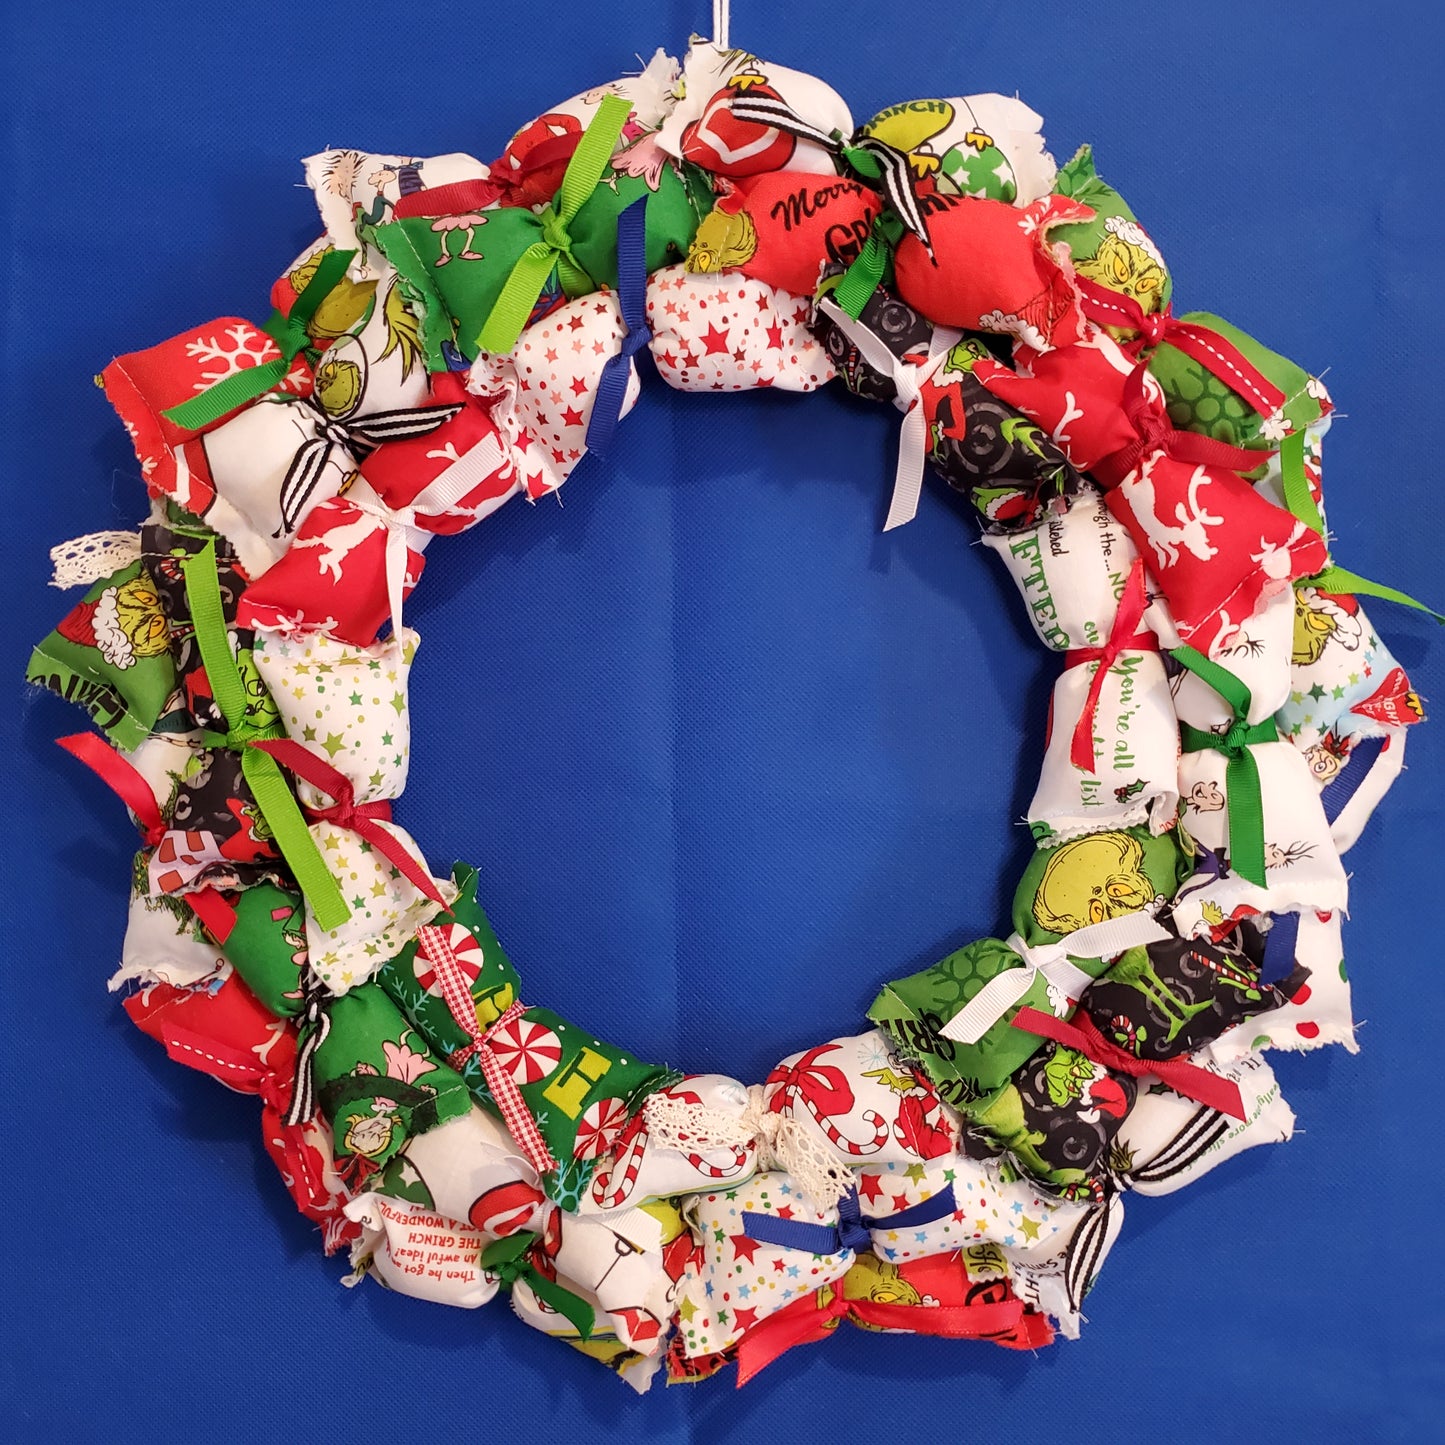 Grinch Theme Holiday Wreaths / Home Decor - Several Options Available